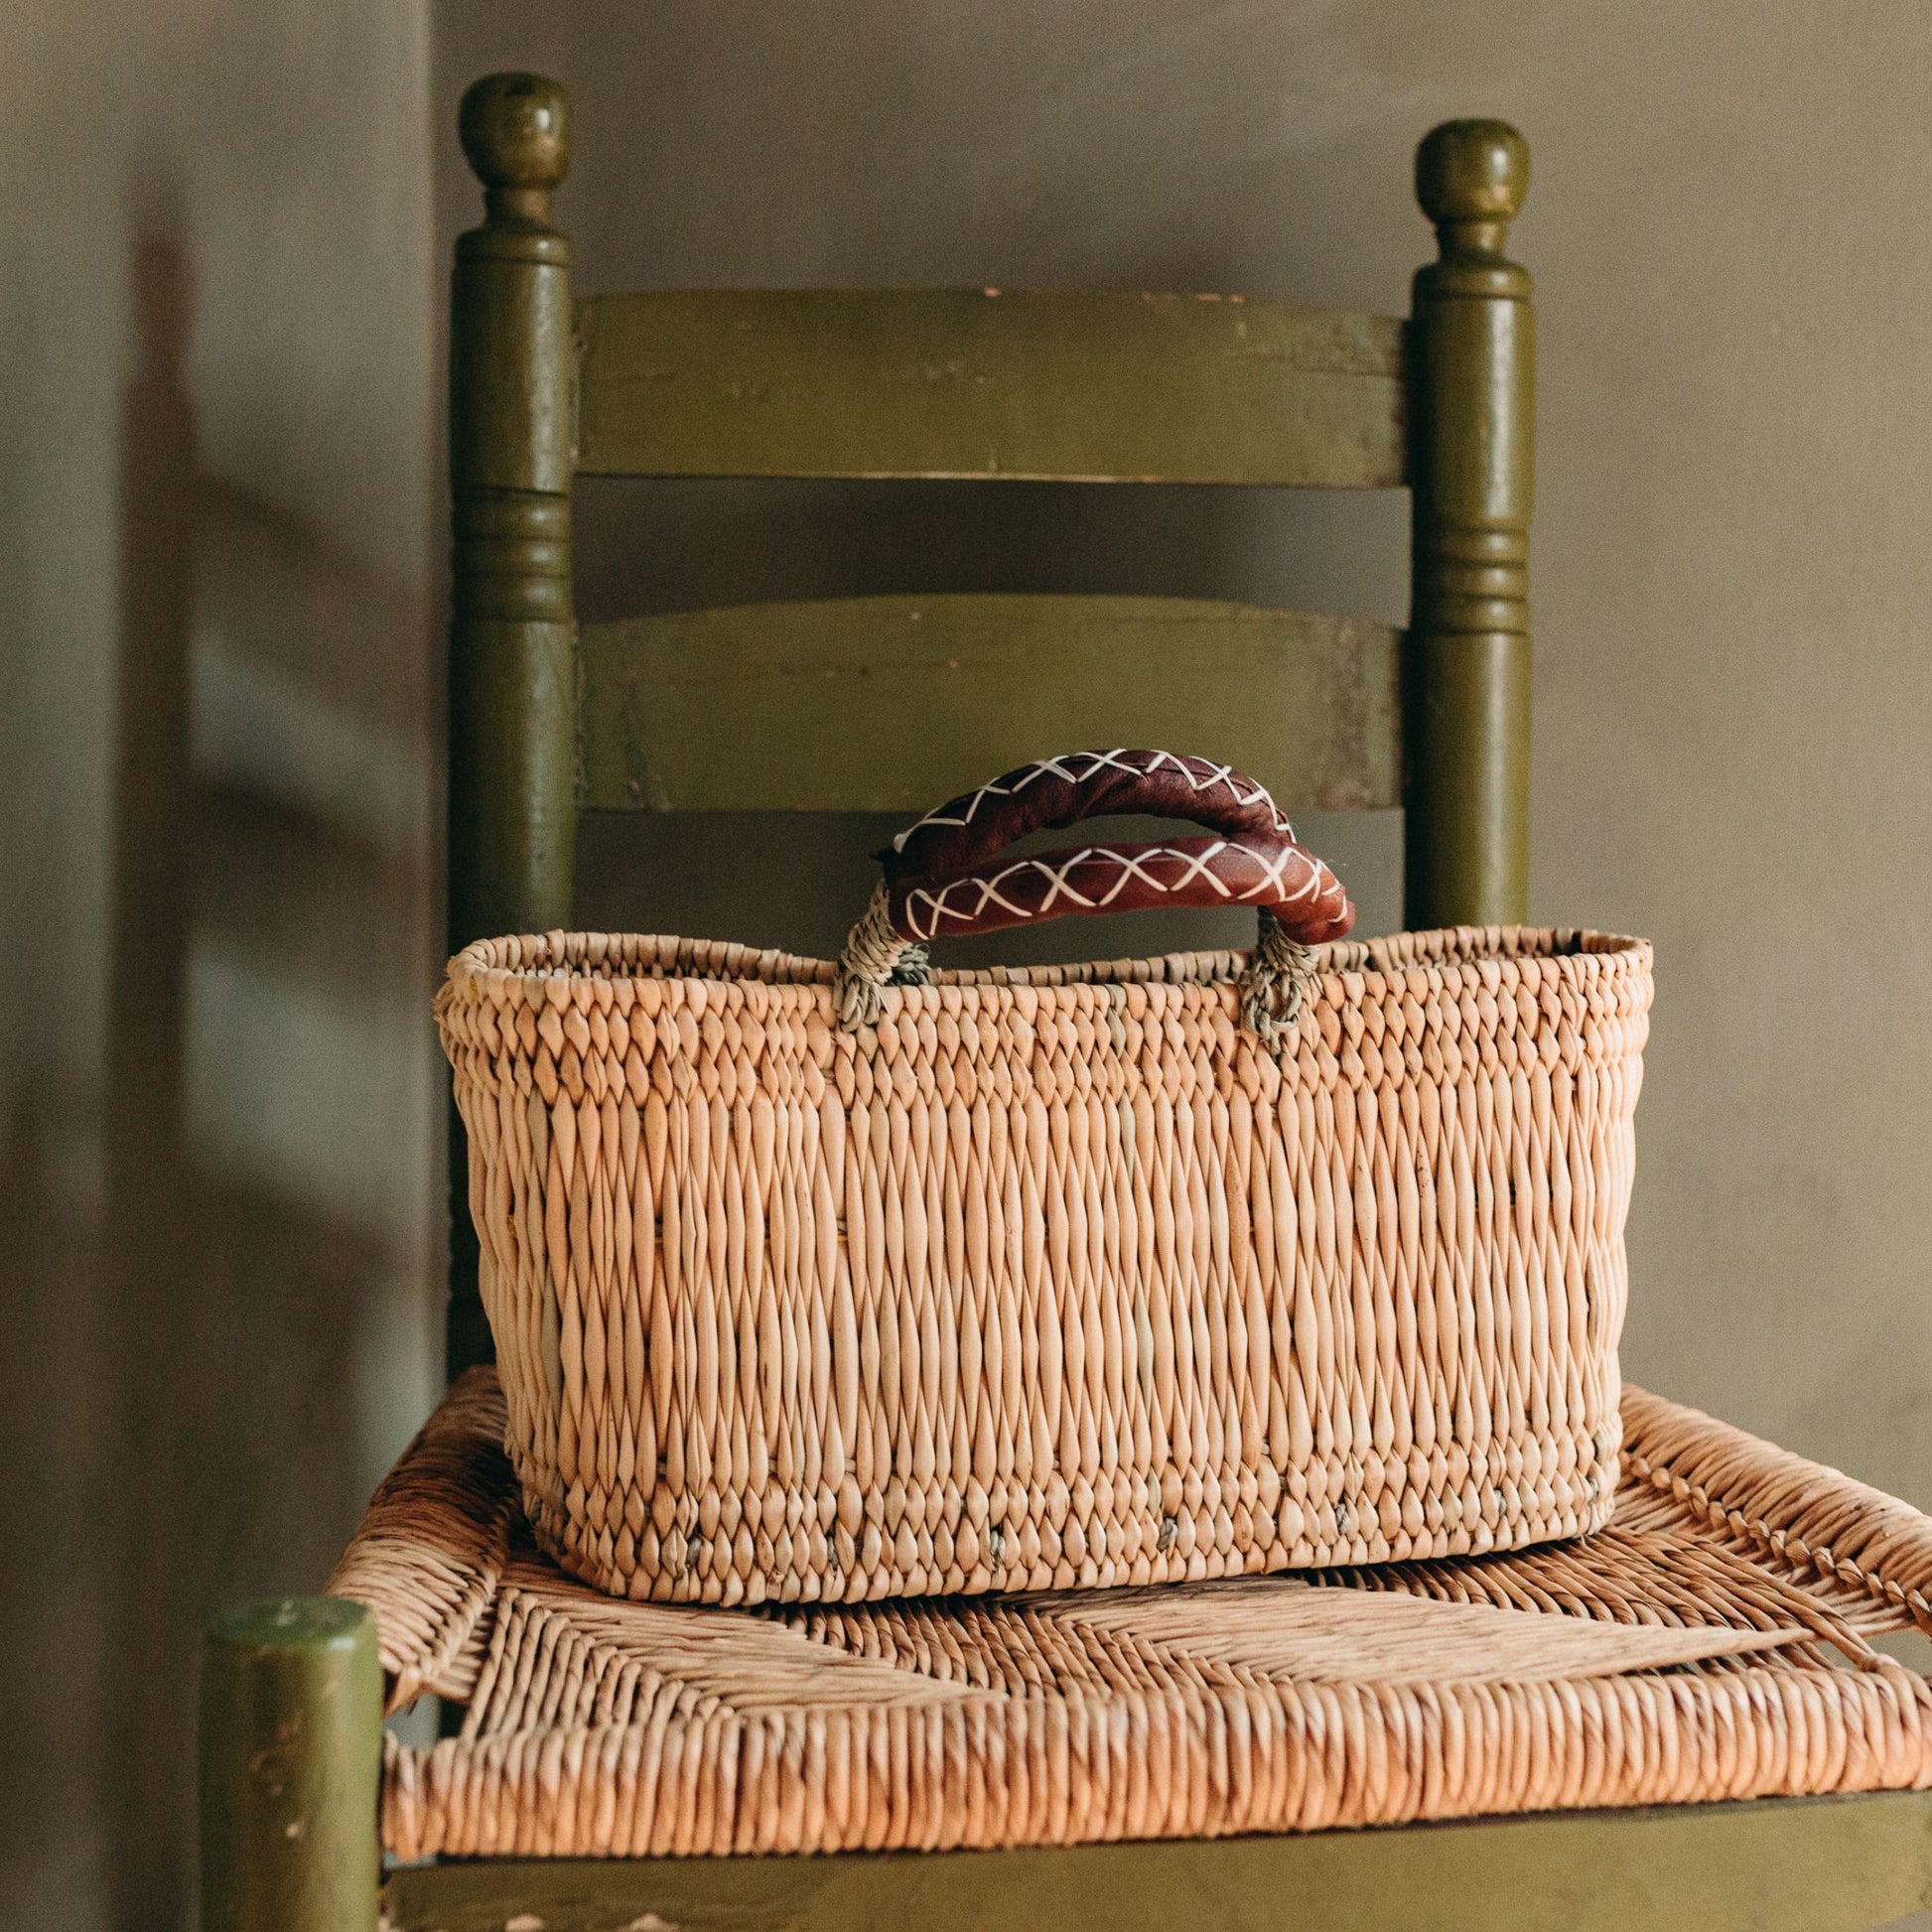 Narrow rectangular handled basket with tan leather handles sitting on a vintage chair